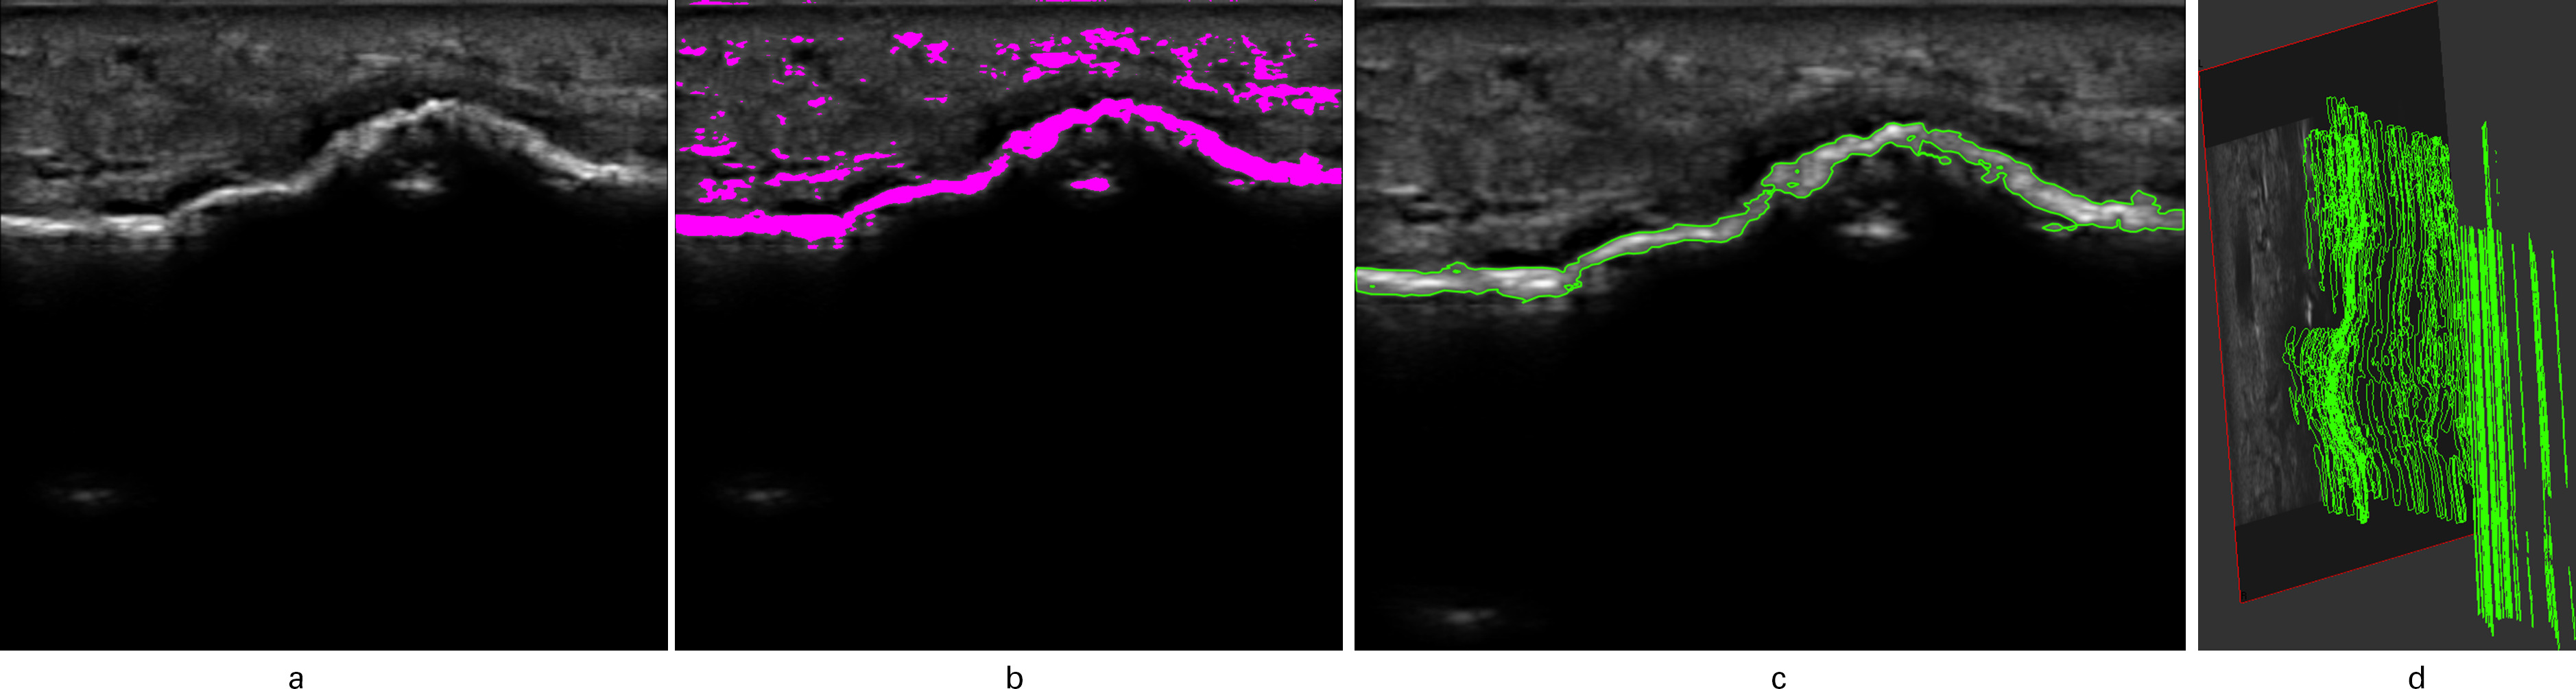 Fig. 1 
            a) Example of semi-automatic ultrasound 3D mapping with callus. a) Long axis scout of tibia. b) Mapping of sonographic callus using the grayscale threshold of 80. c). Plotted sonographic callus. d) Matrix plot of sequential 2D images of sonographic callus and cortical tibia surface.
          